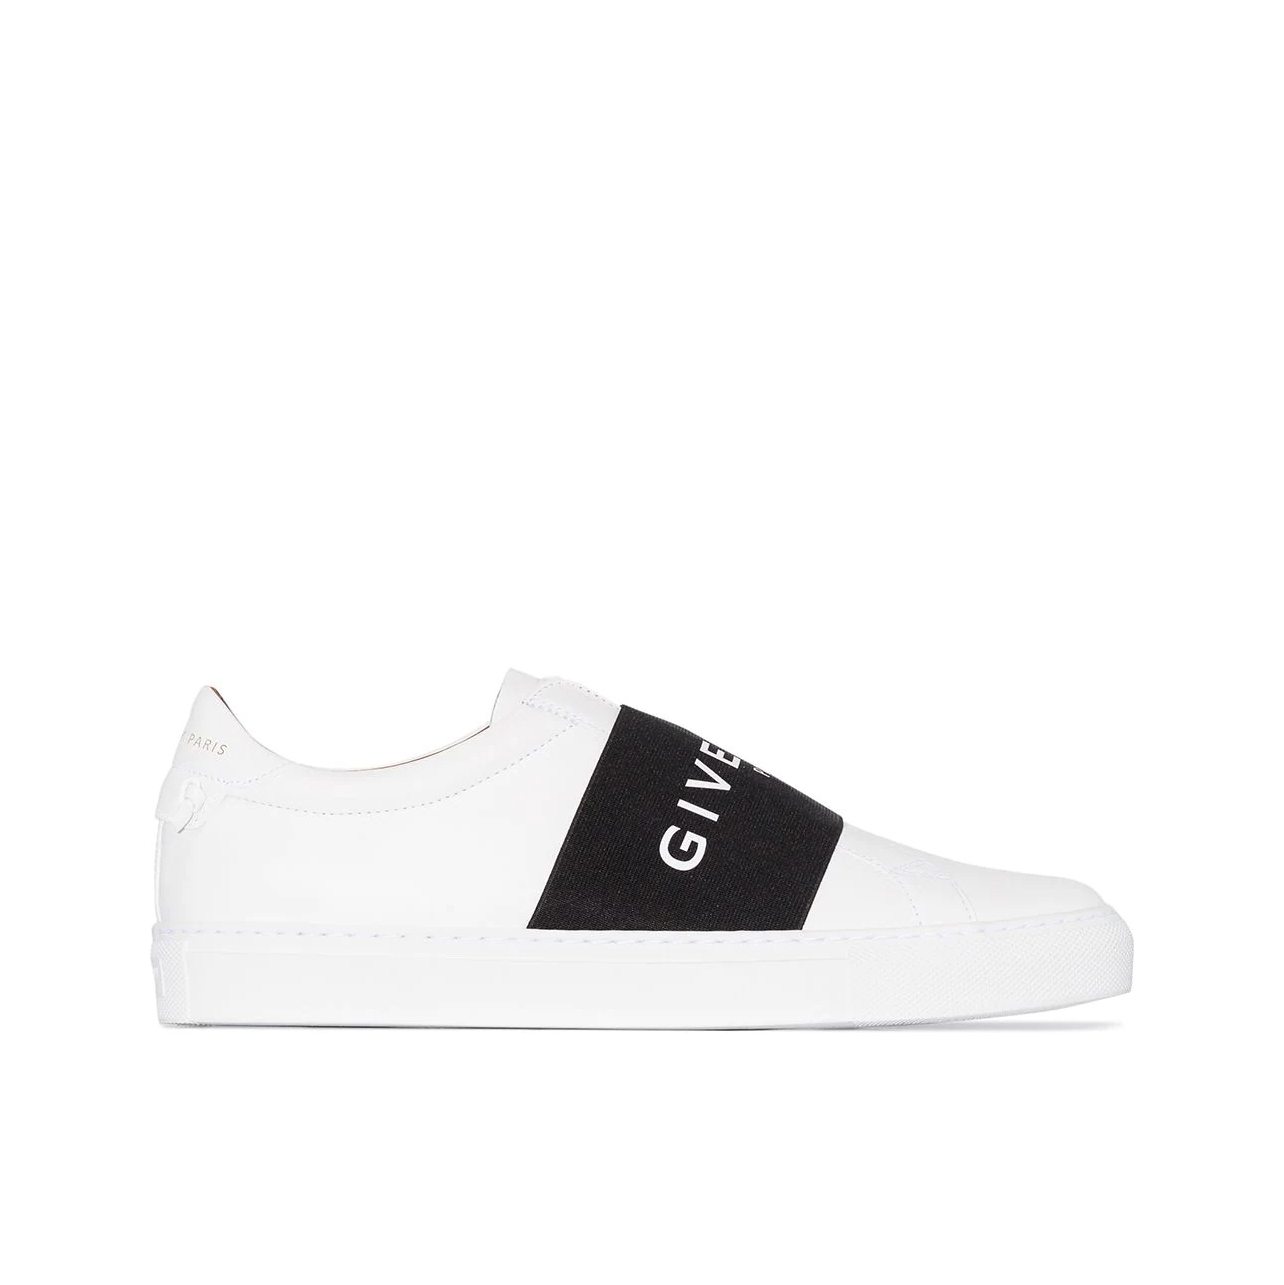 White & Green City Sport Sneakers by Givenchy on Sale